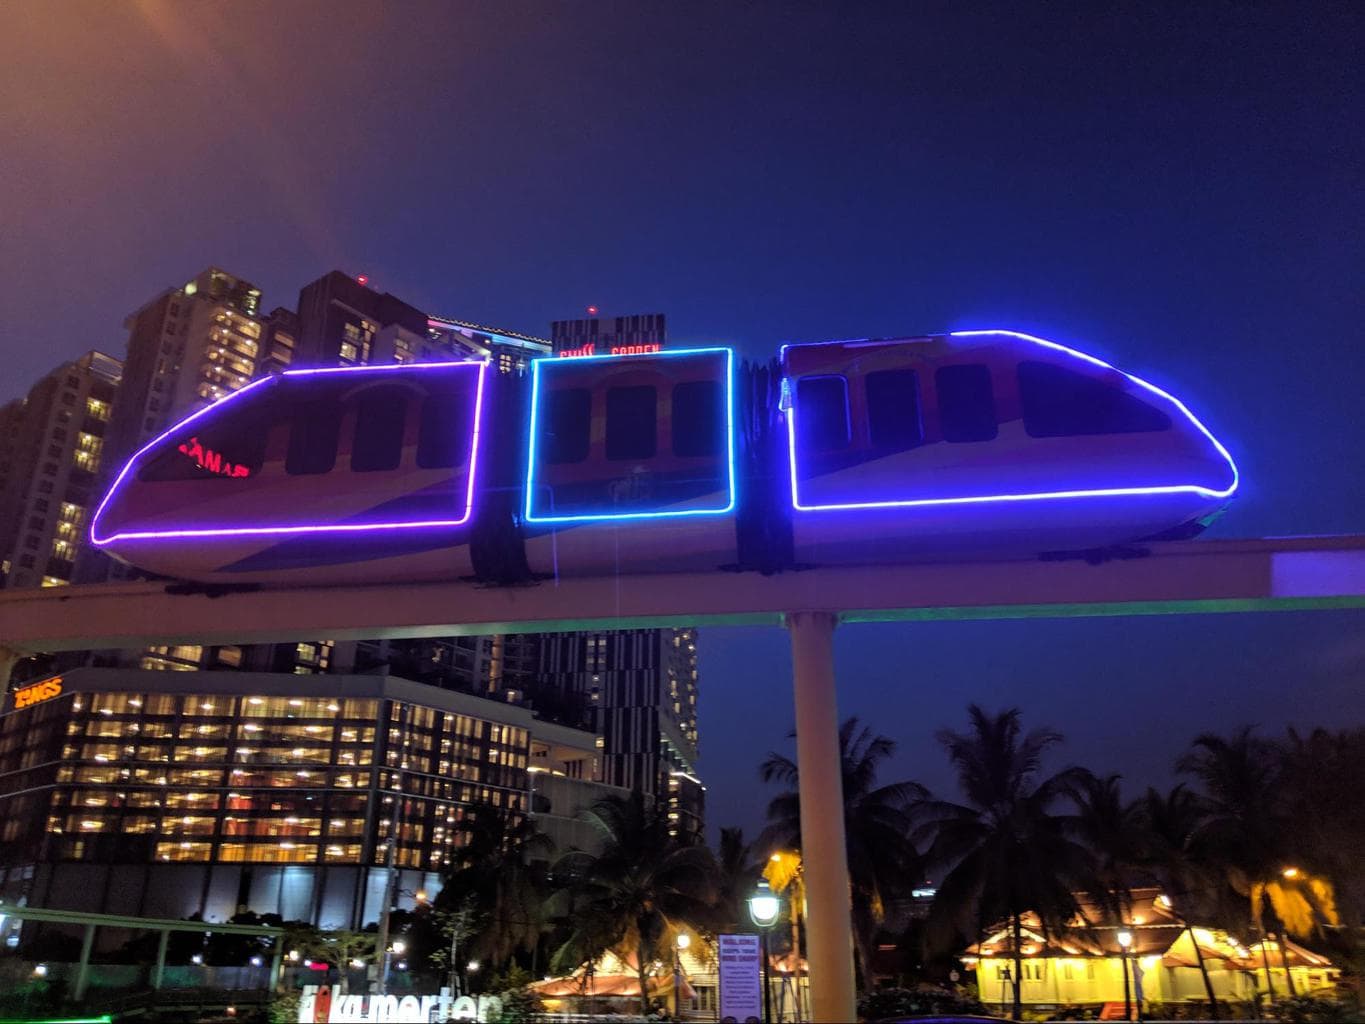 Ride the monorail